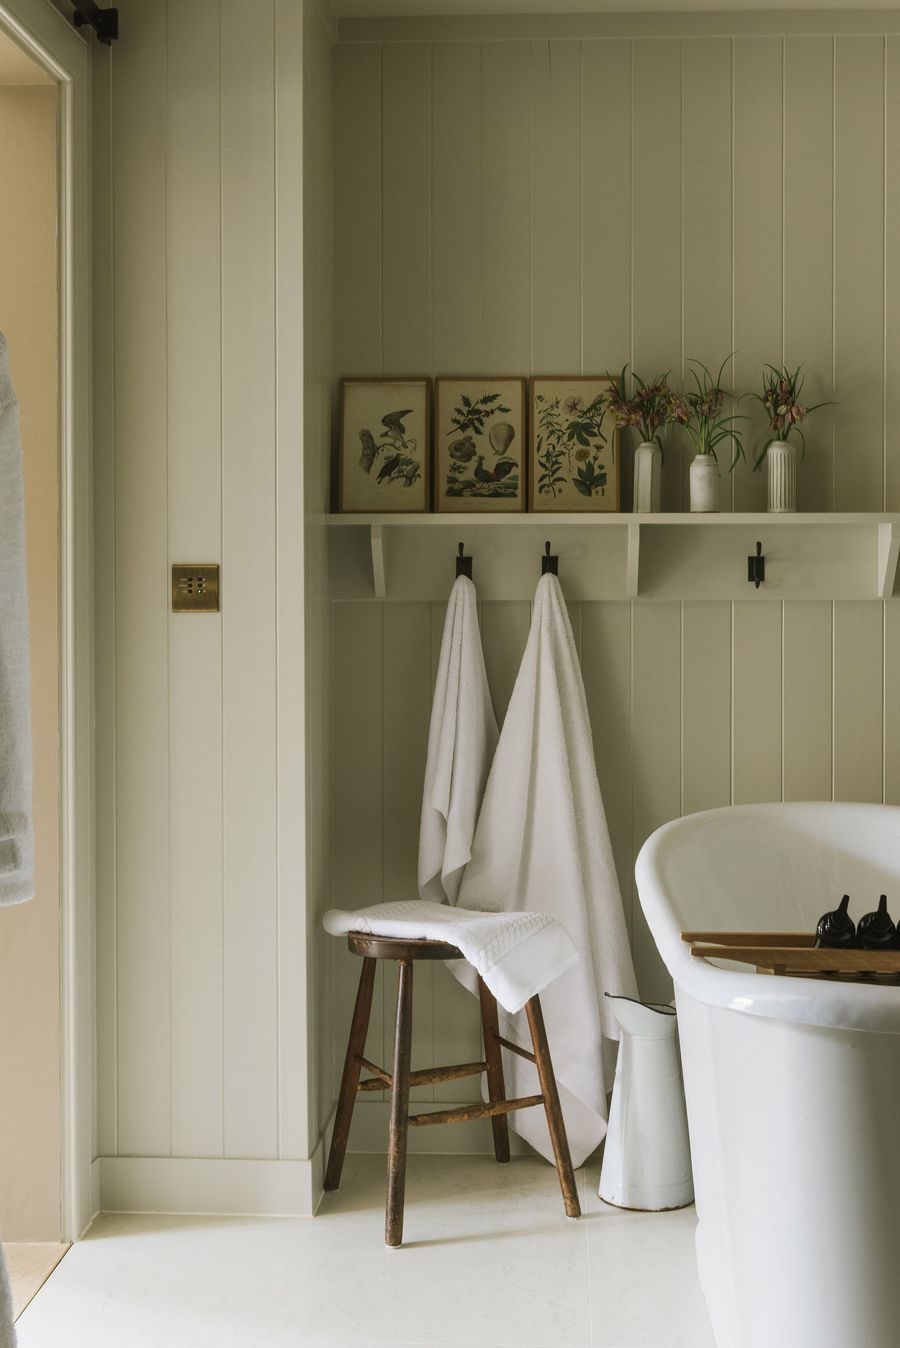 Wood stool in Modern English country bathroom via Ben Thompson Heckfield Place